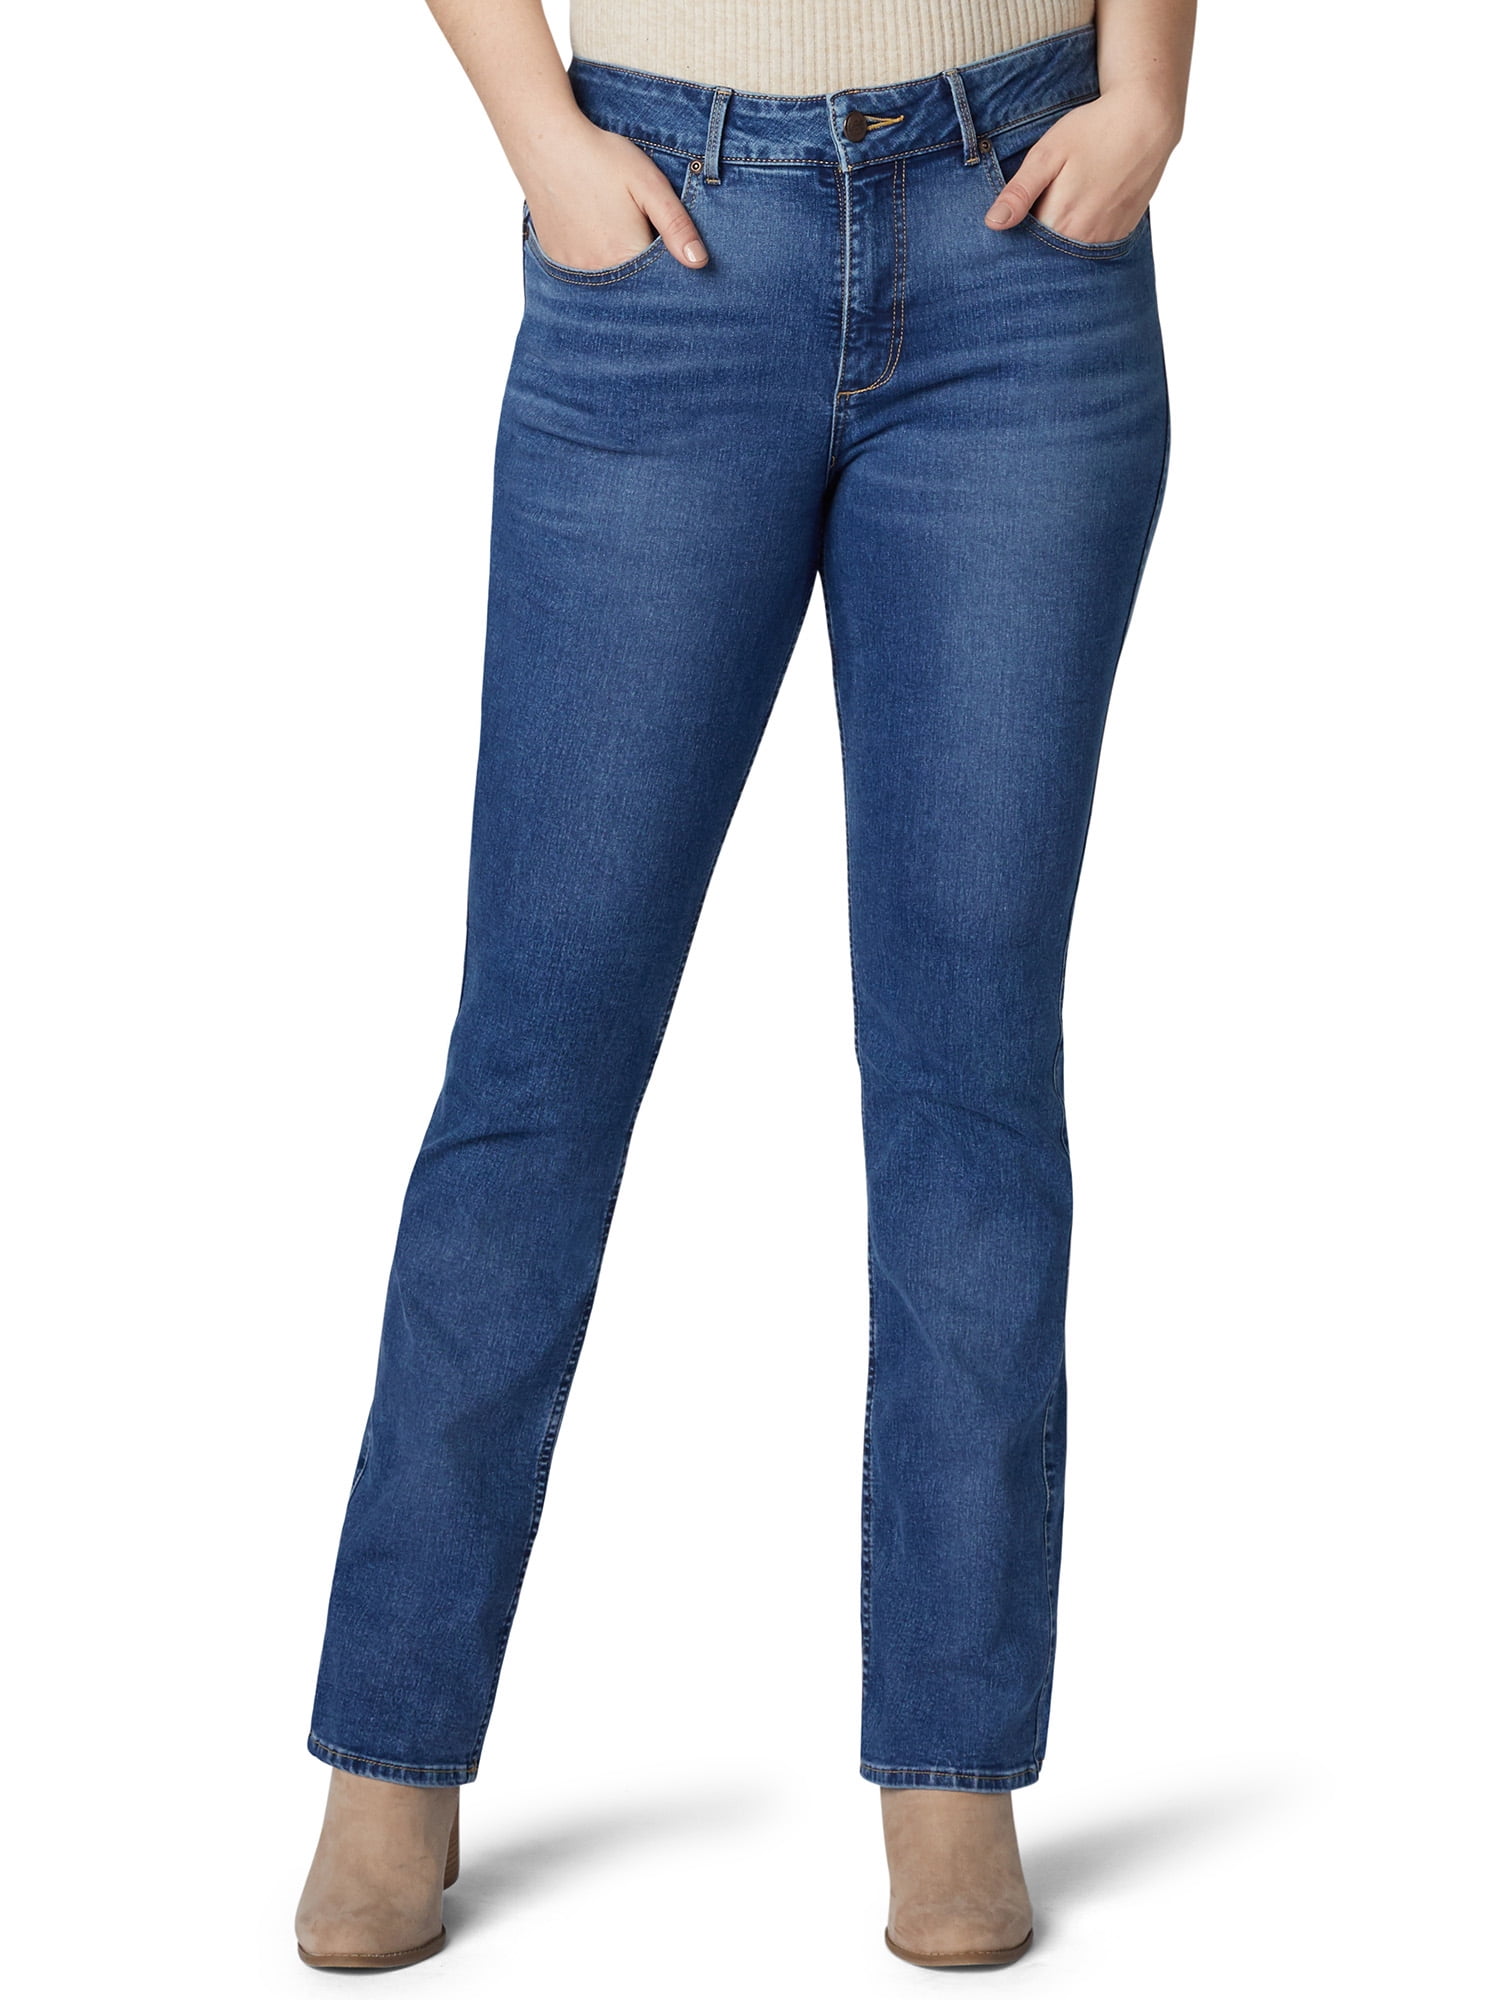 lee riders plus size jeans